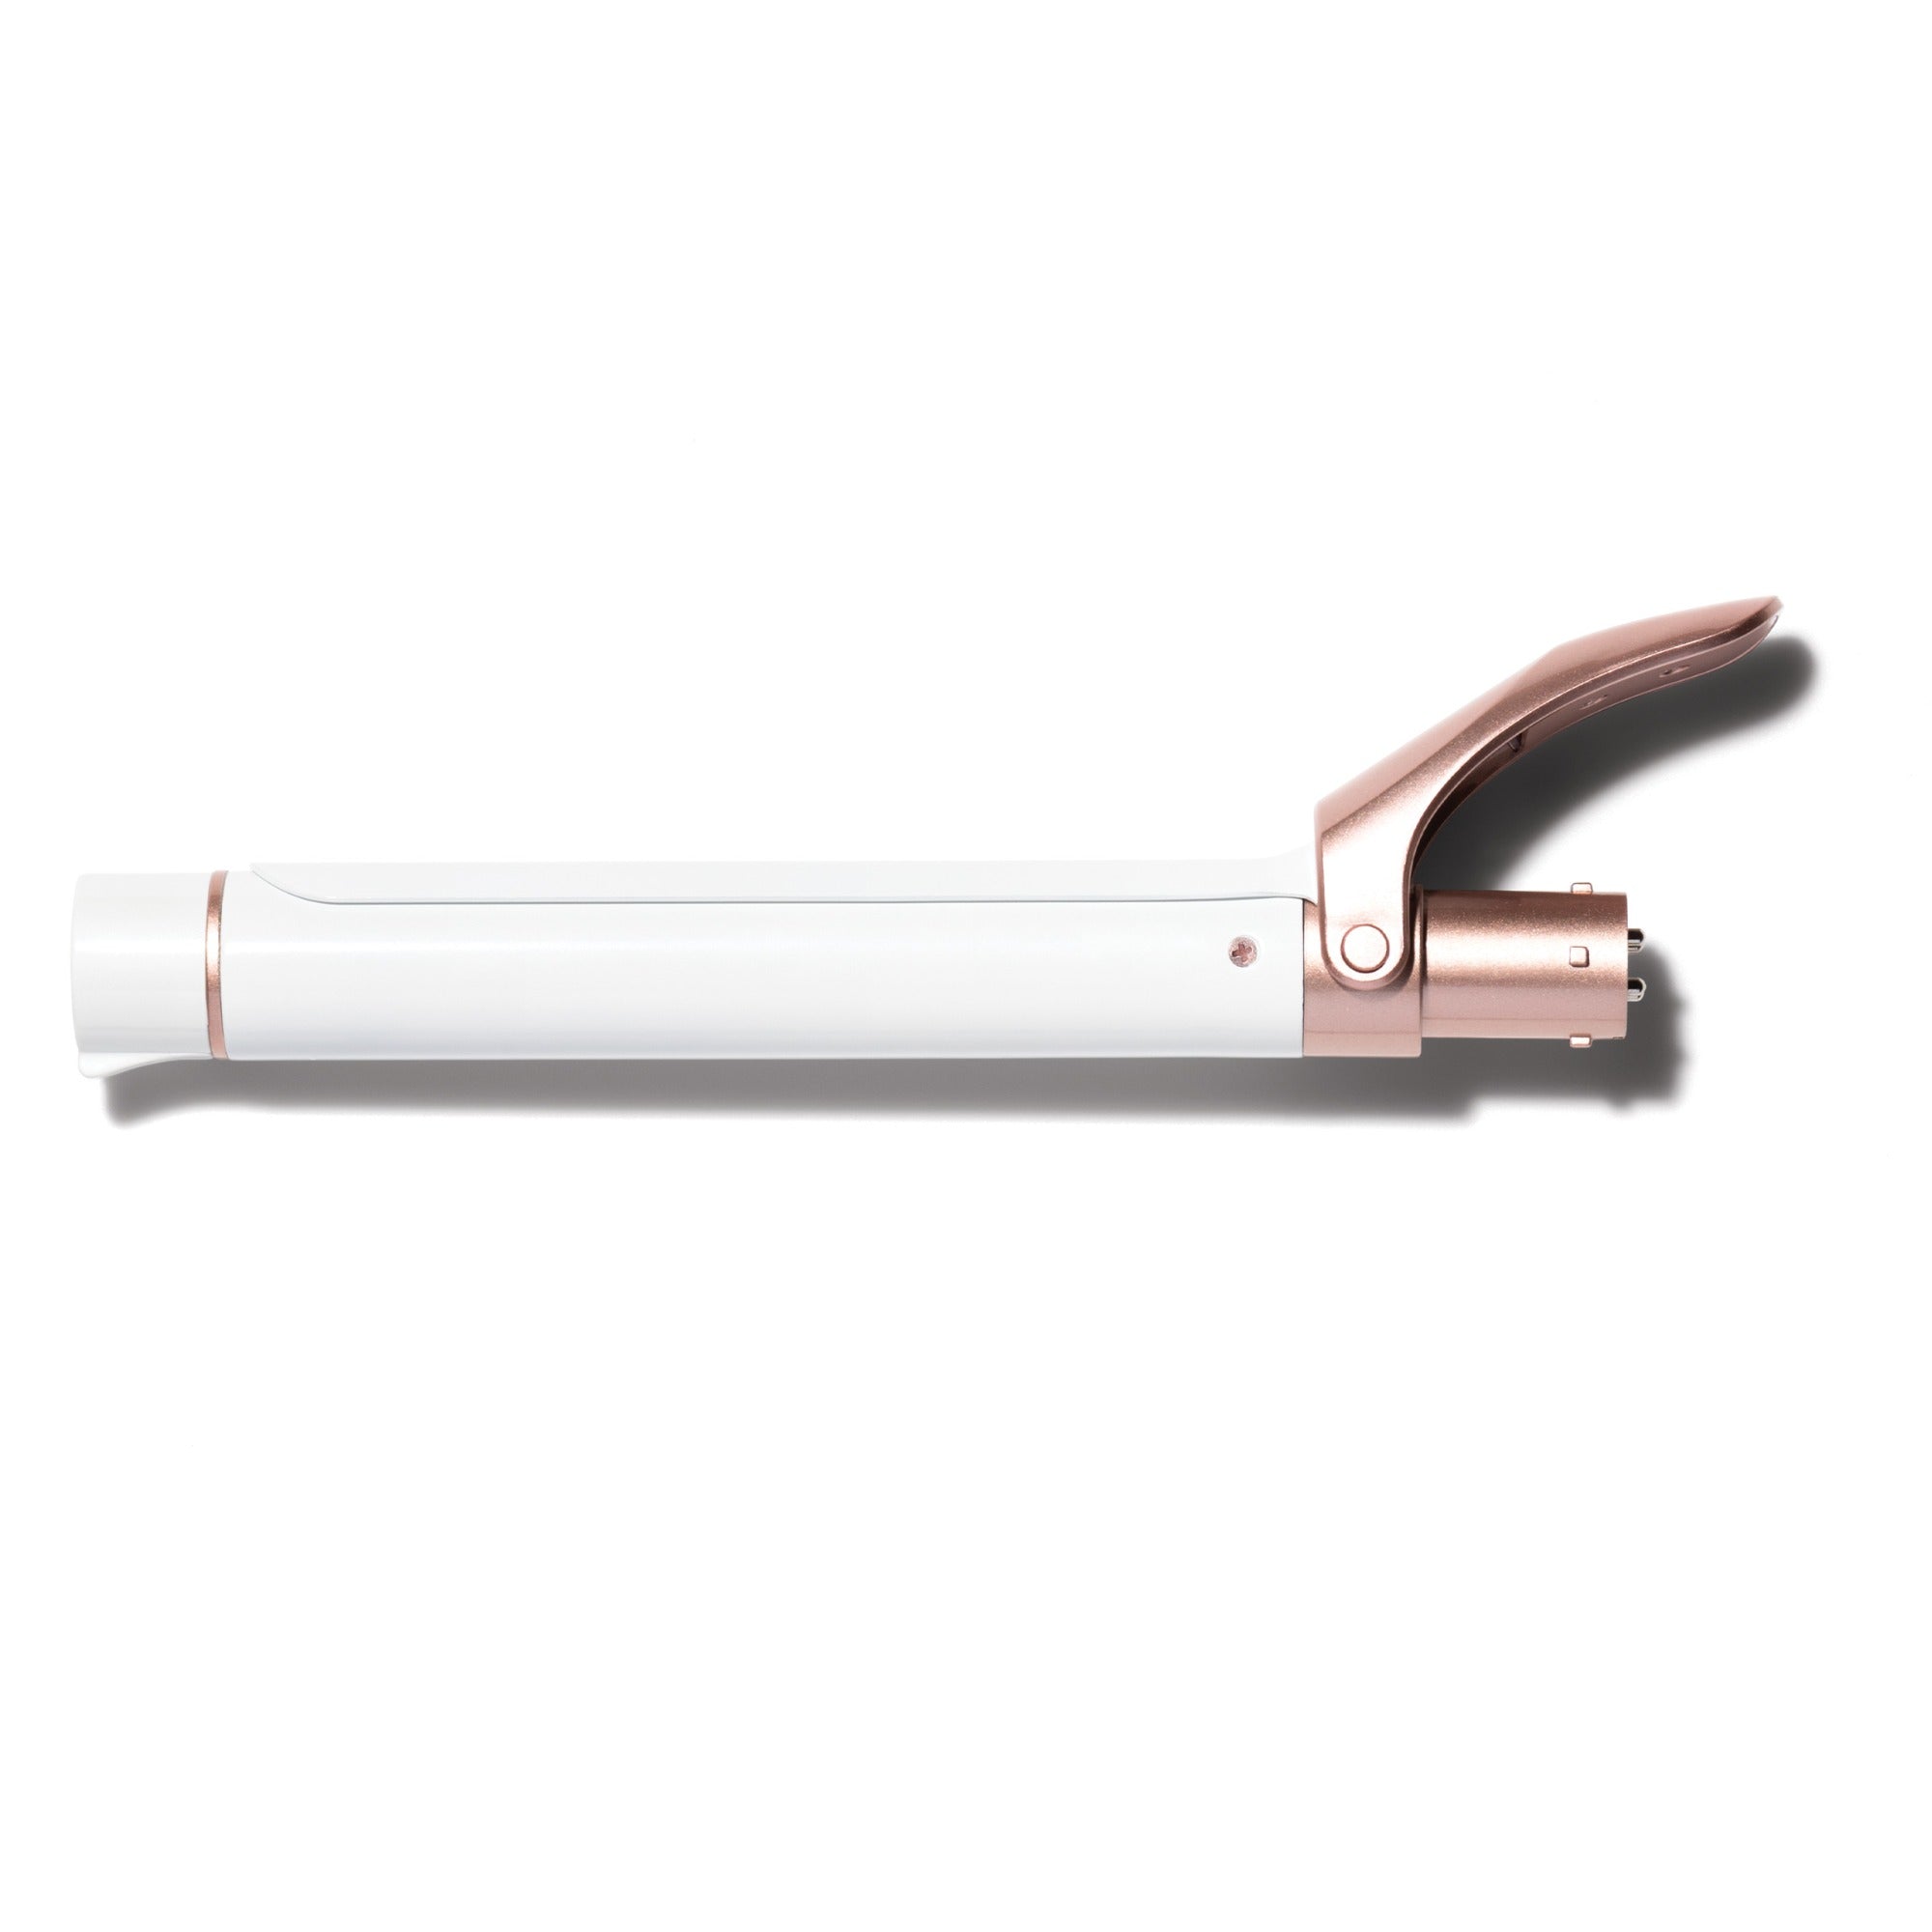 Side view of the T3 Clip Barrel Curling Iron